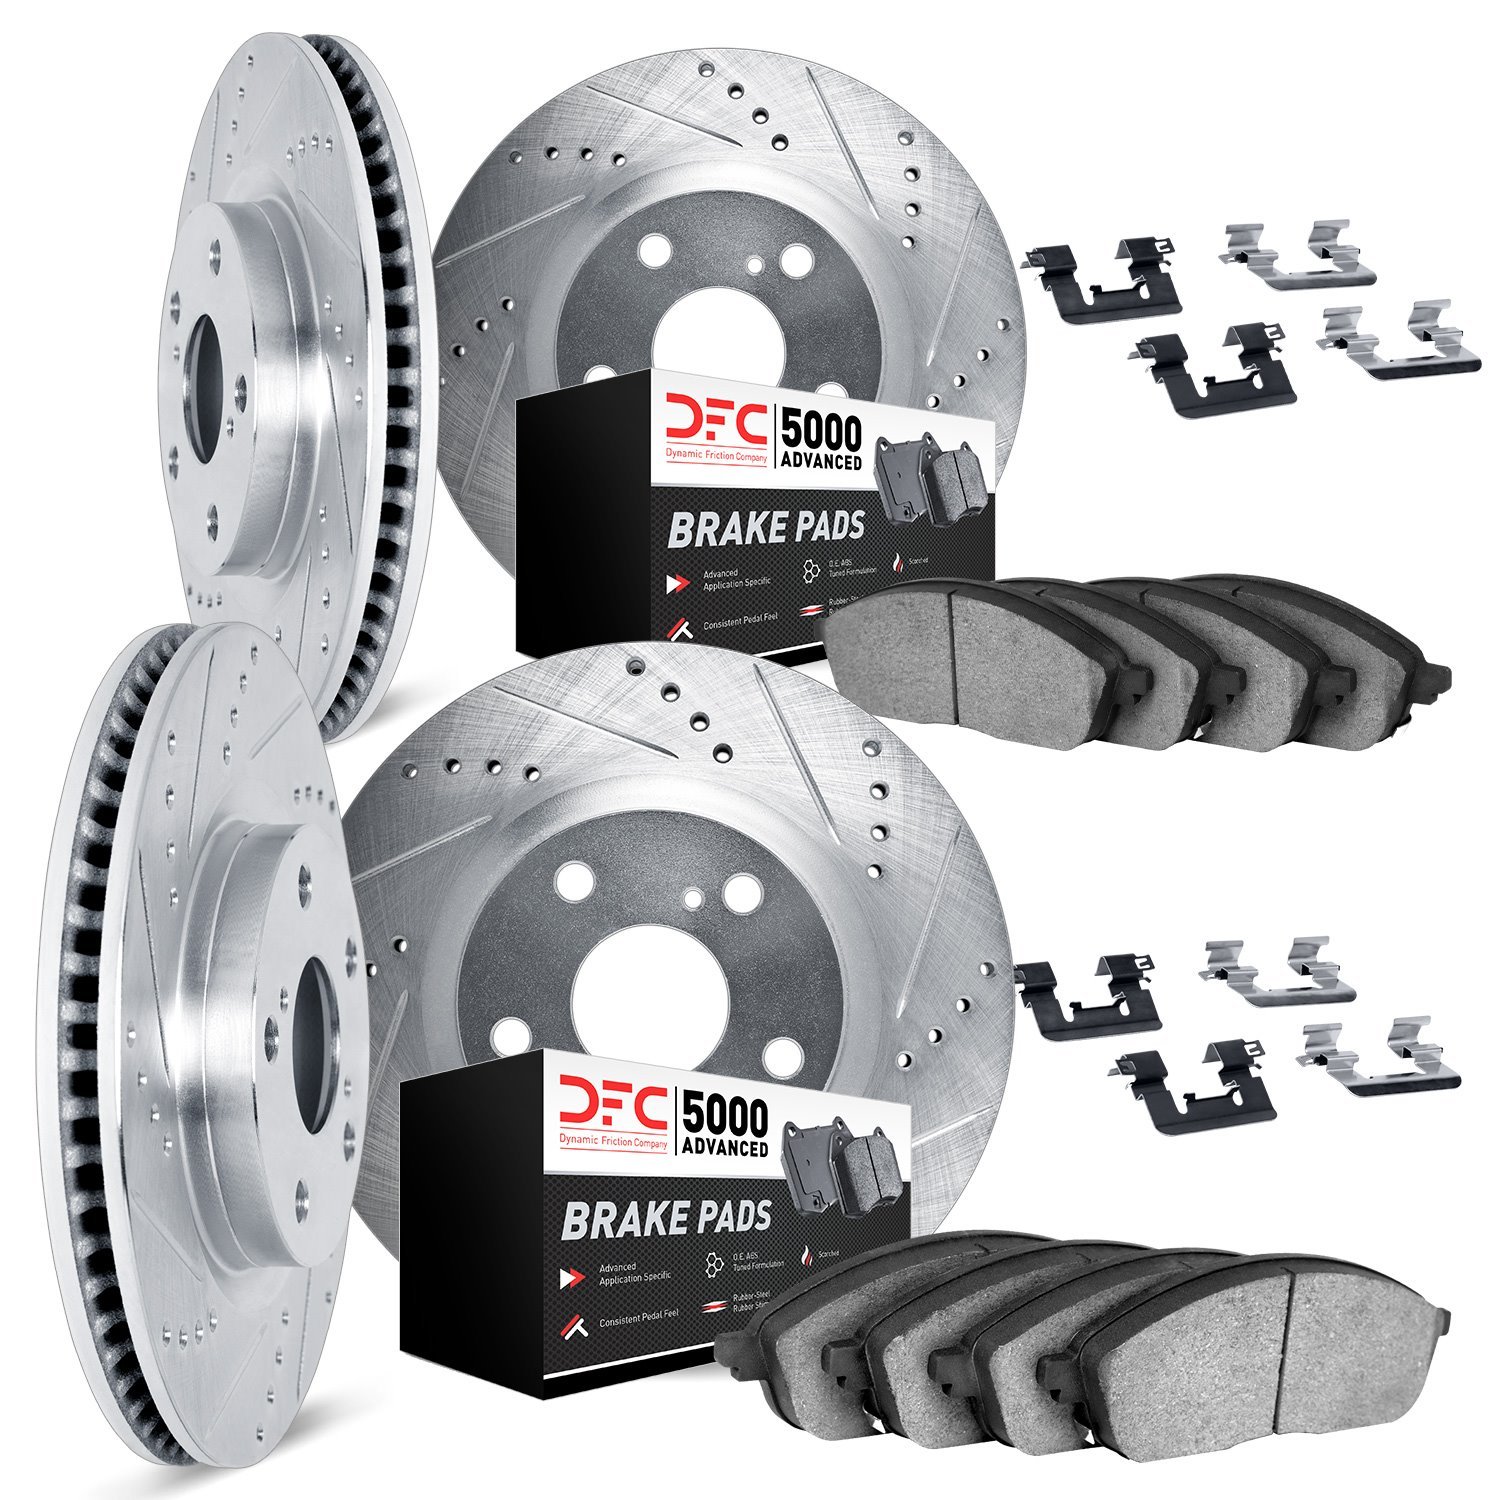 7514-13019 Drilled/Slotted Brake Rotors w/5000 Advanced Brake Pads Kit & Hardware [Silver], Fits Select Subaru, Position: Front